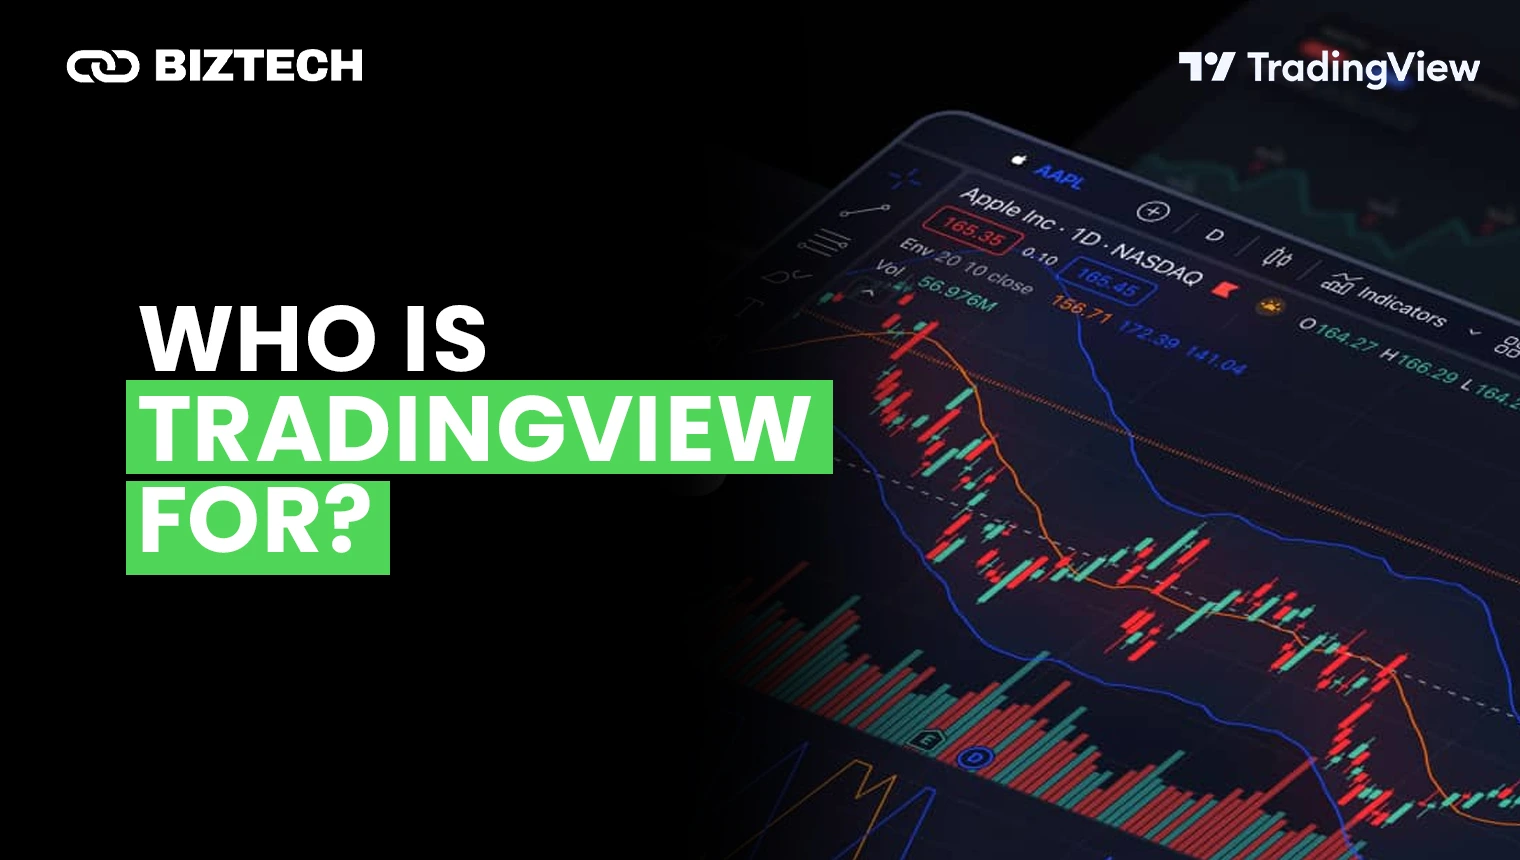 Who is TradingView For